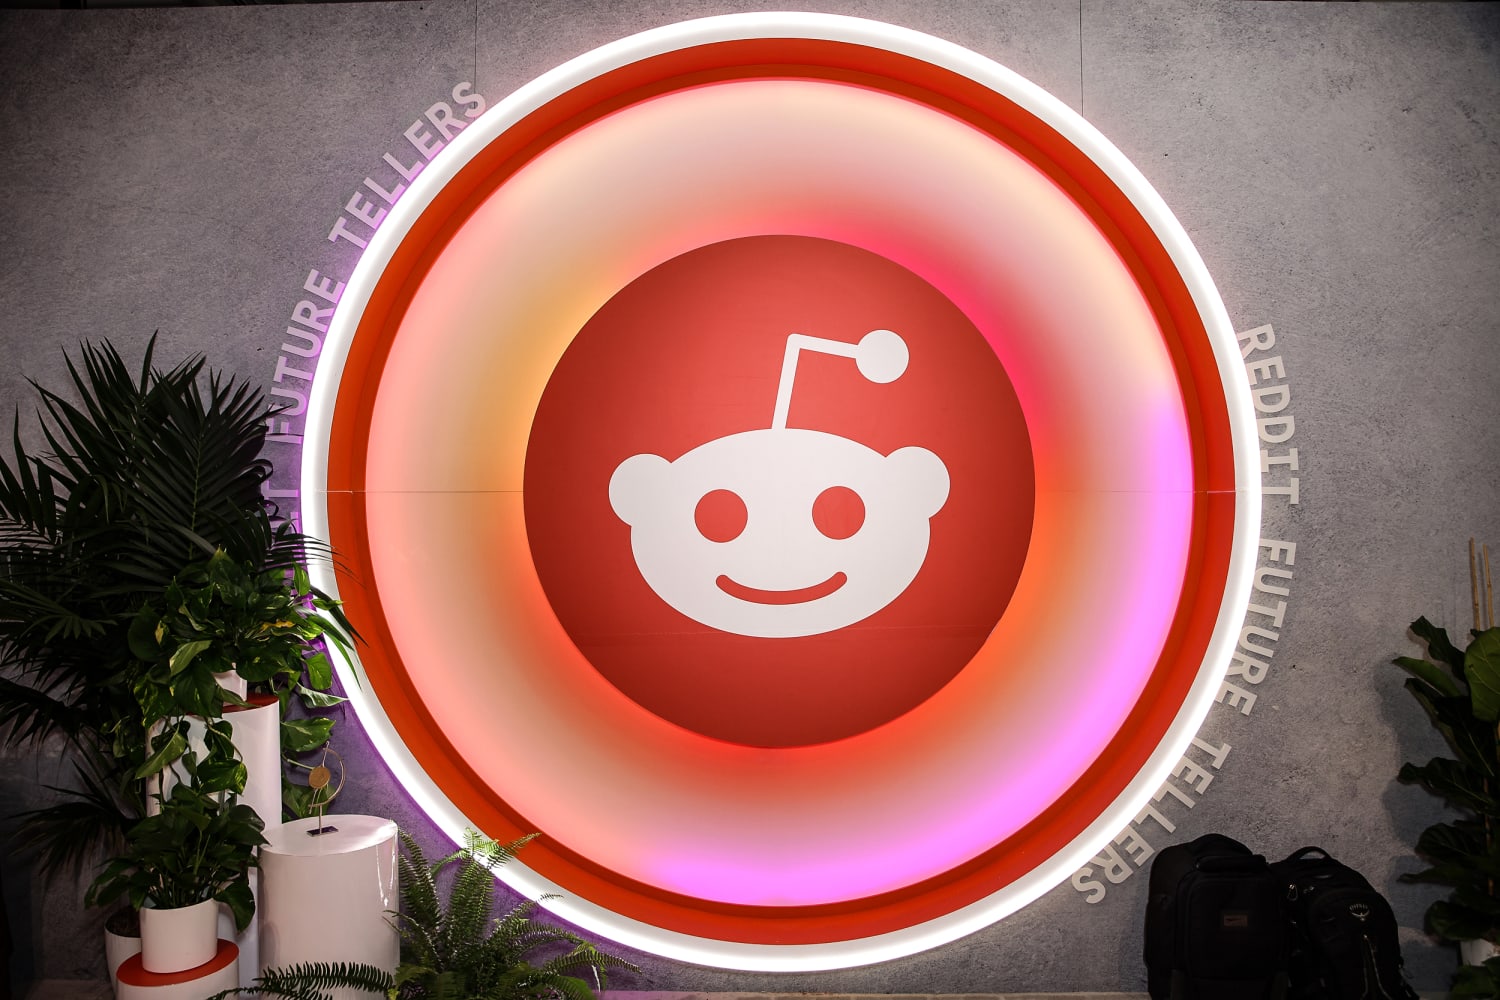 Reddit Communities Embrace Creative Protests in Response to Company's Moderator Crackdown